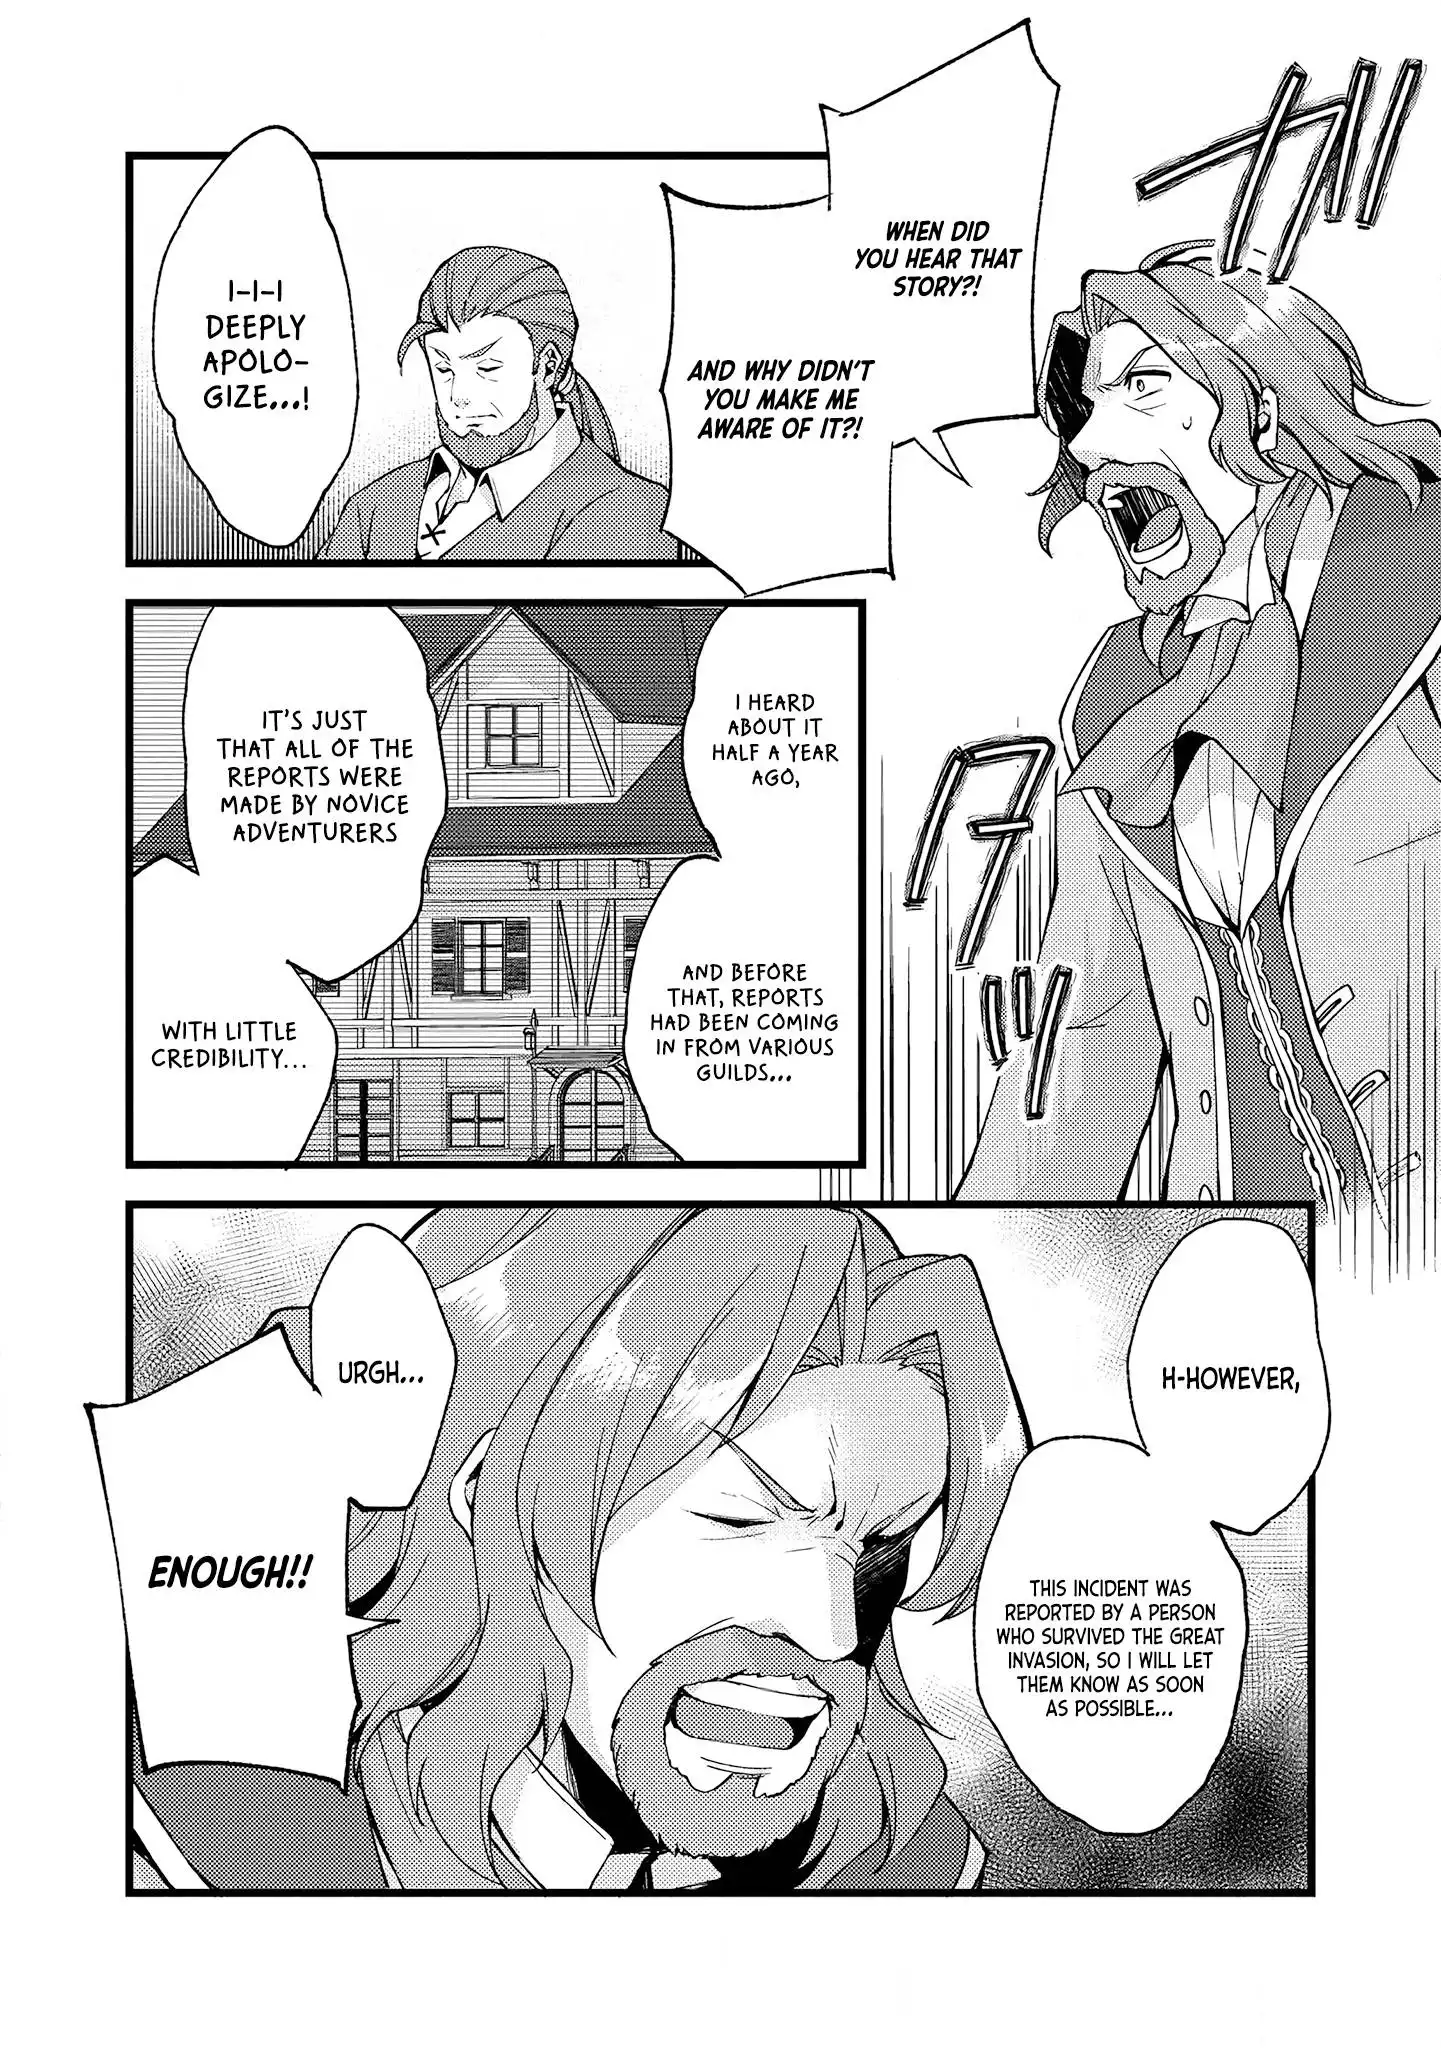 A Sword Master Childhood Friend Power Harassed Me Harshly, so I Broke off Our Relationship and Made a Fresh Start at the Frontier as a Magic Swordsman Chapter 20